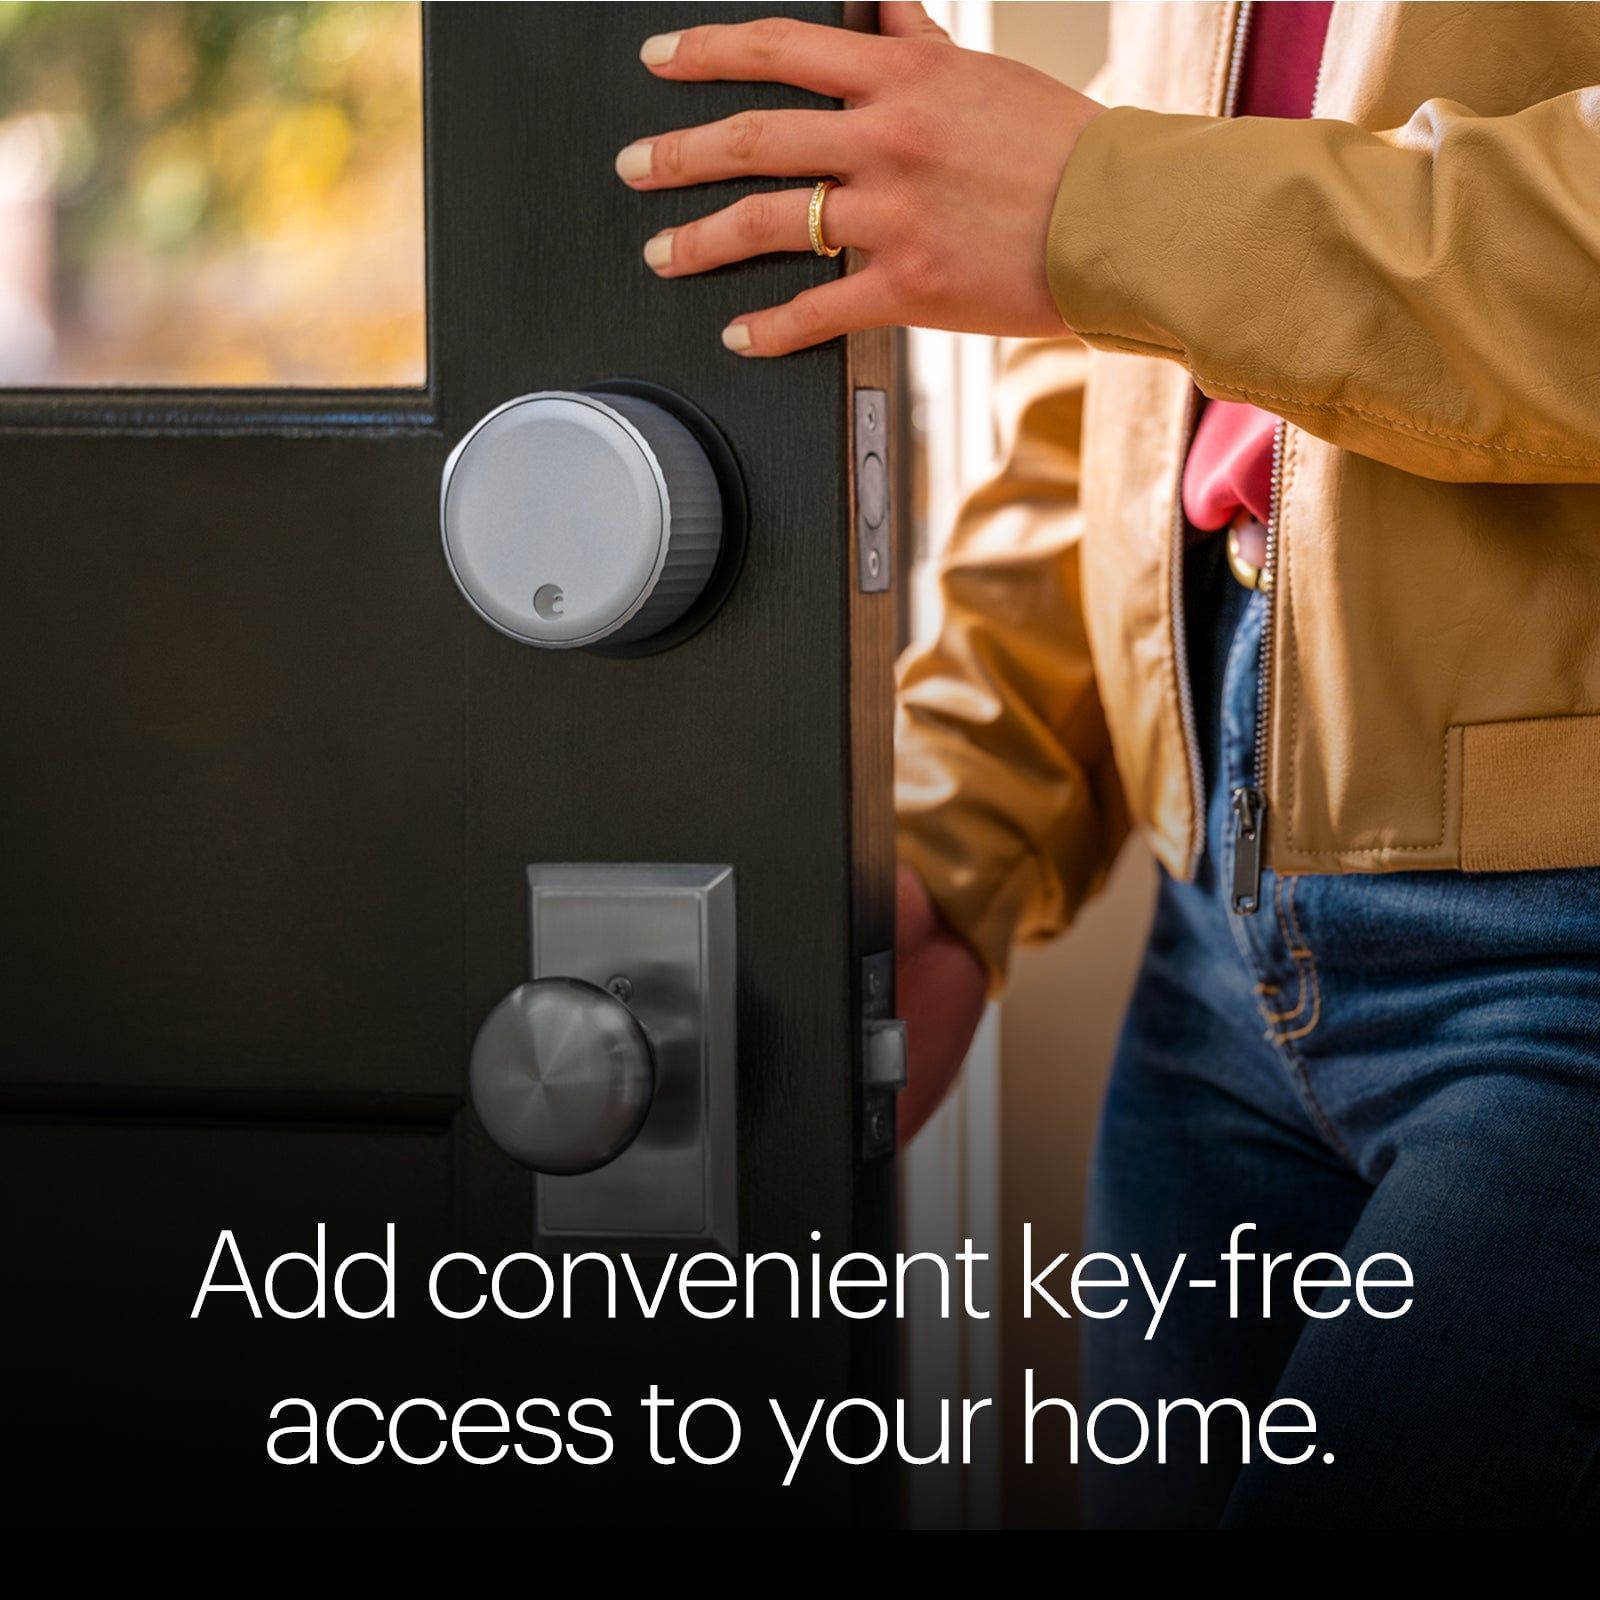 August Home Smart Lock, 3rd Generation – Silver